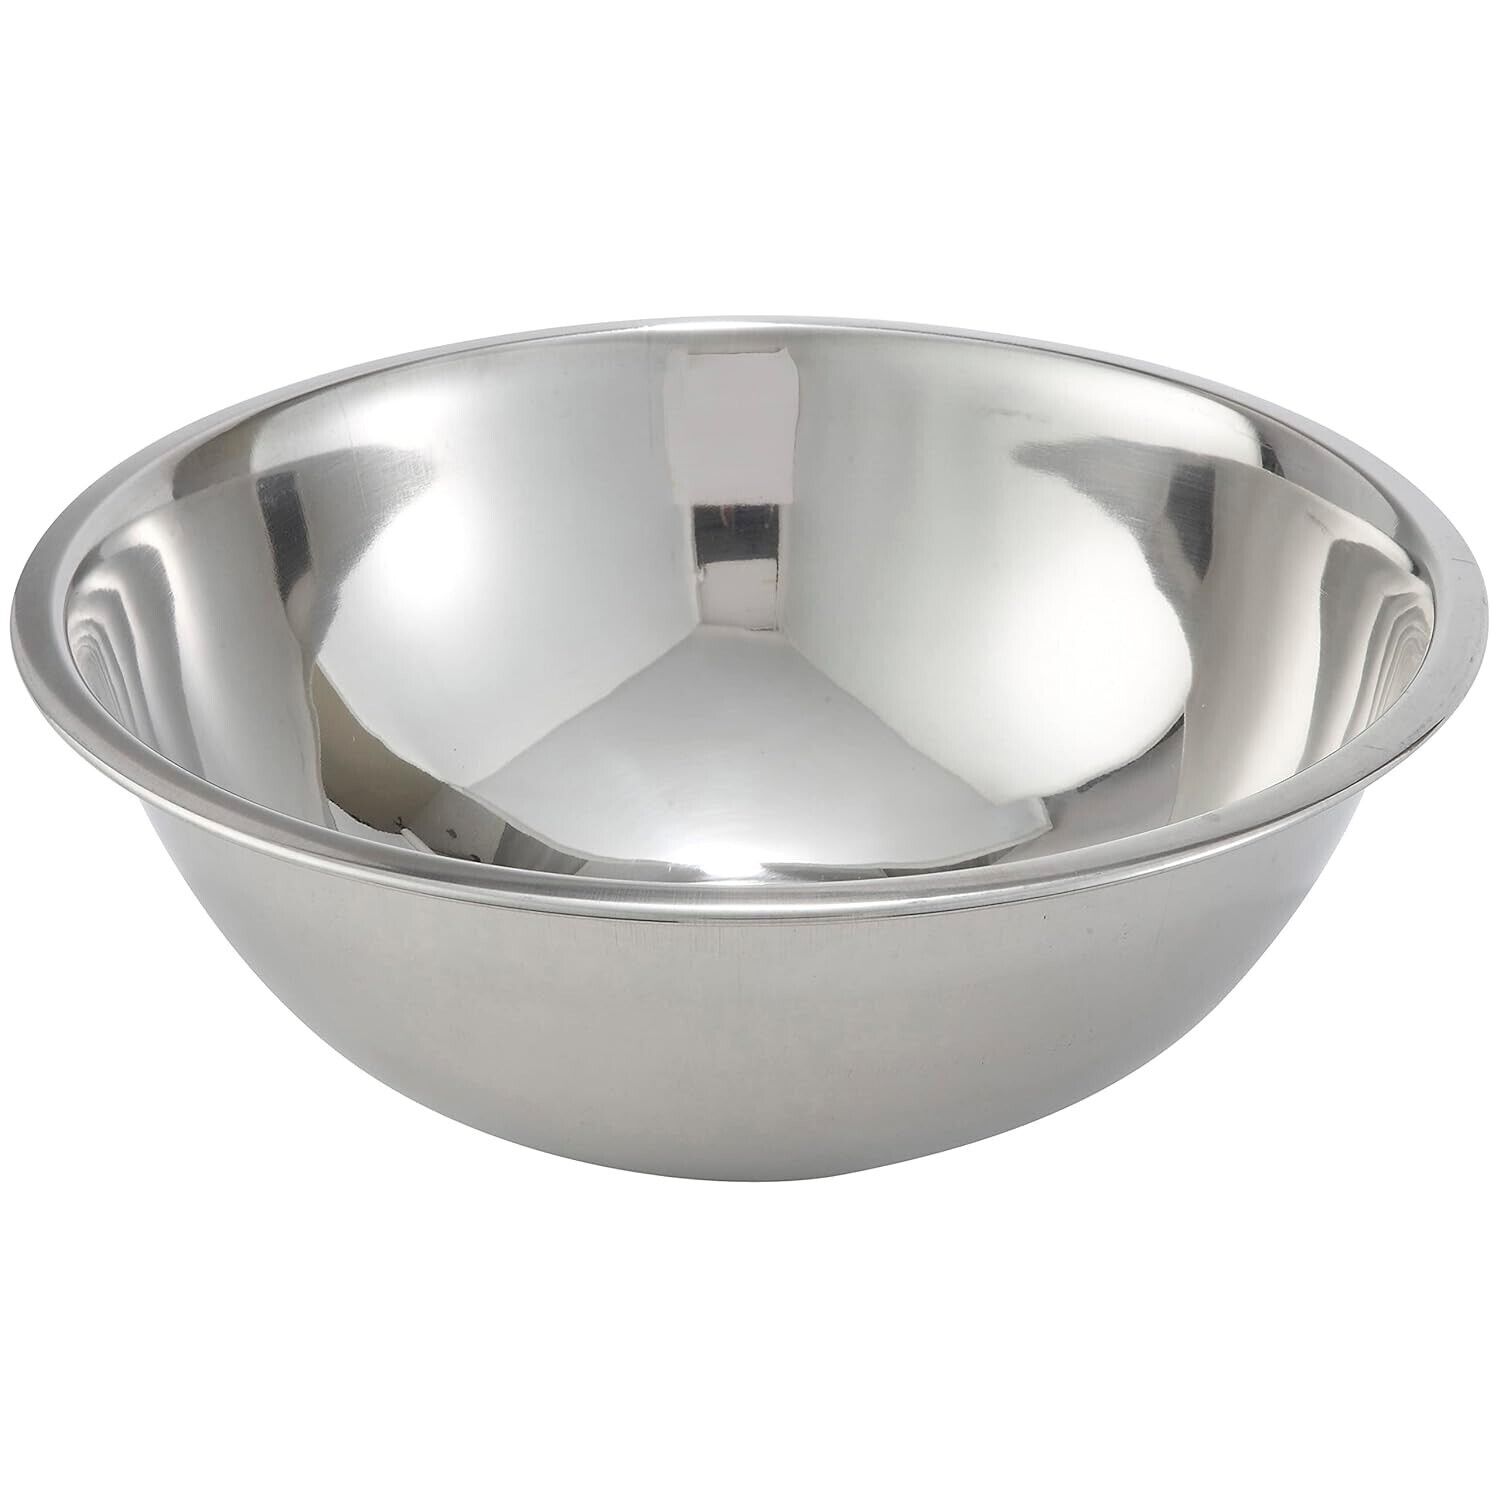 Winco Stainless Steel Mixing Bowl, 8-Quart